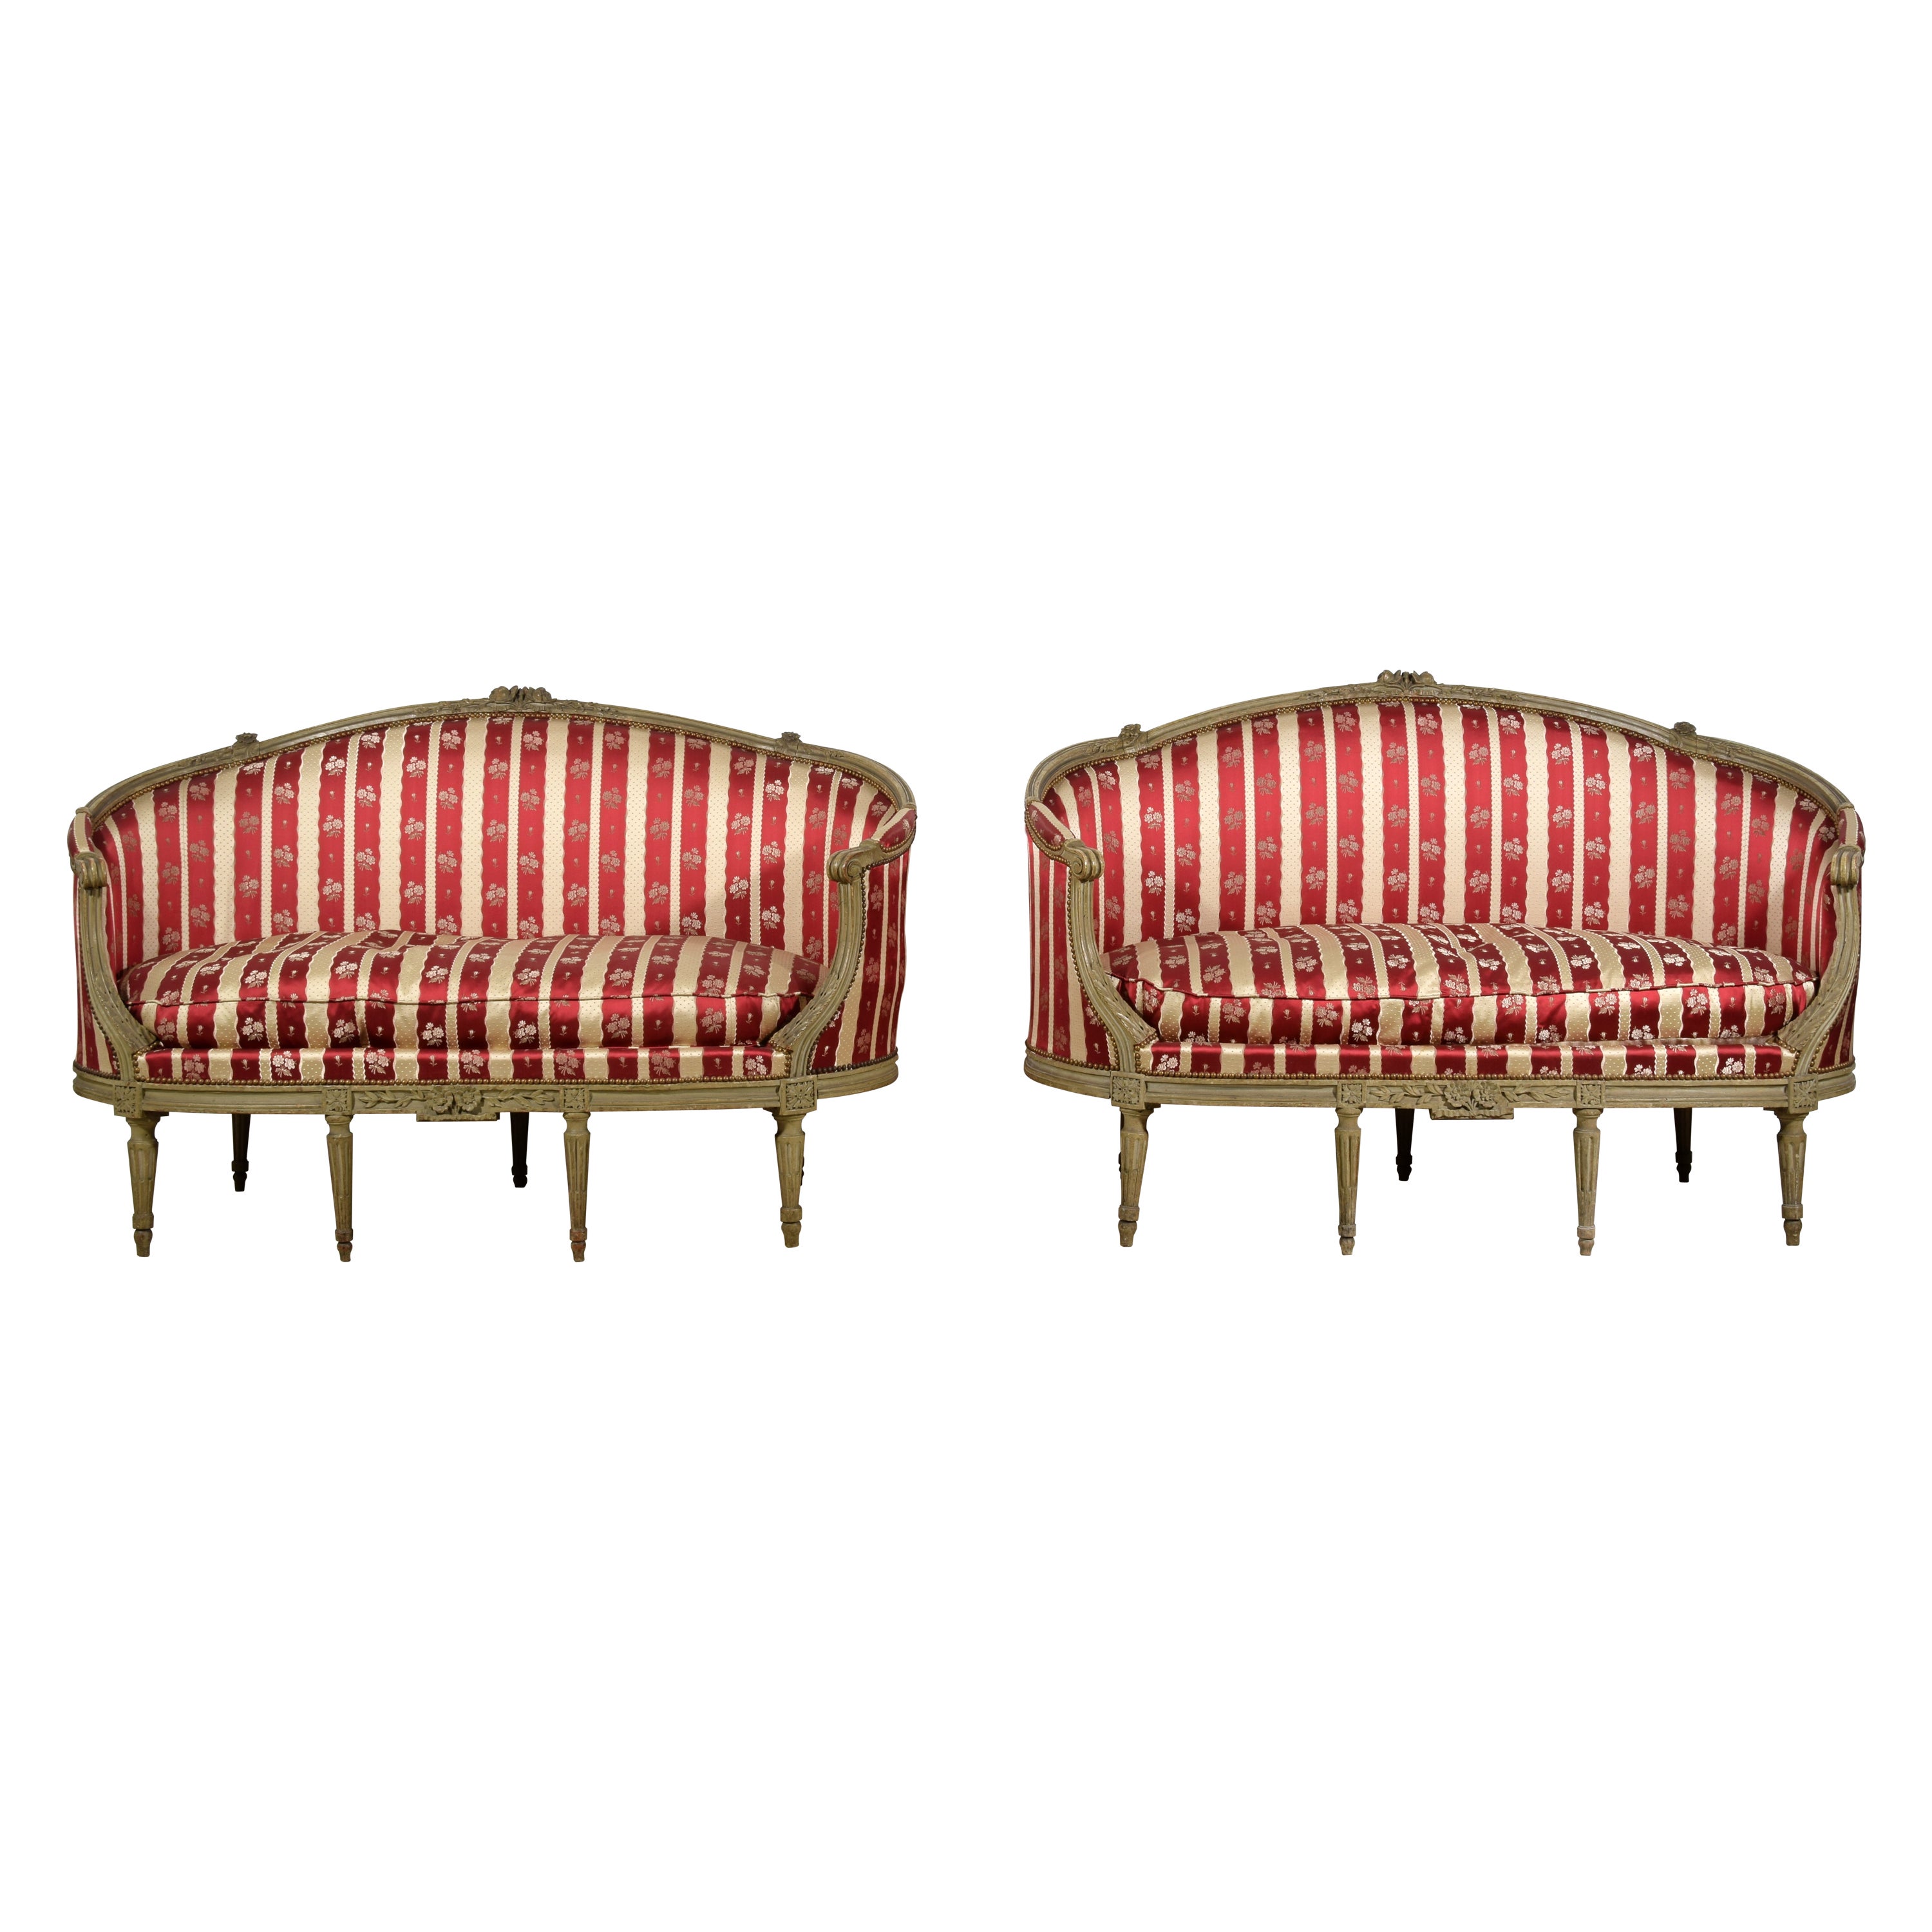 18th Century, Pair of Louis XVI French Lacquered Wood Corbeille Canapes